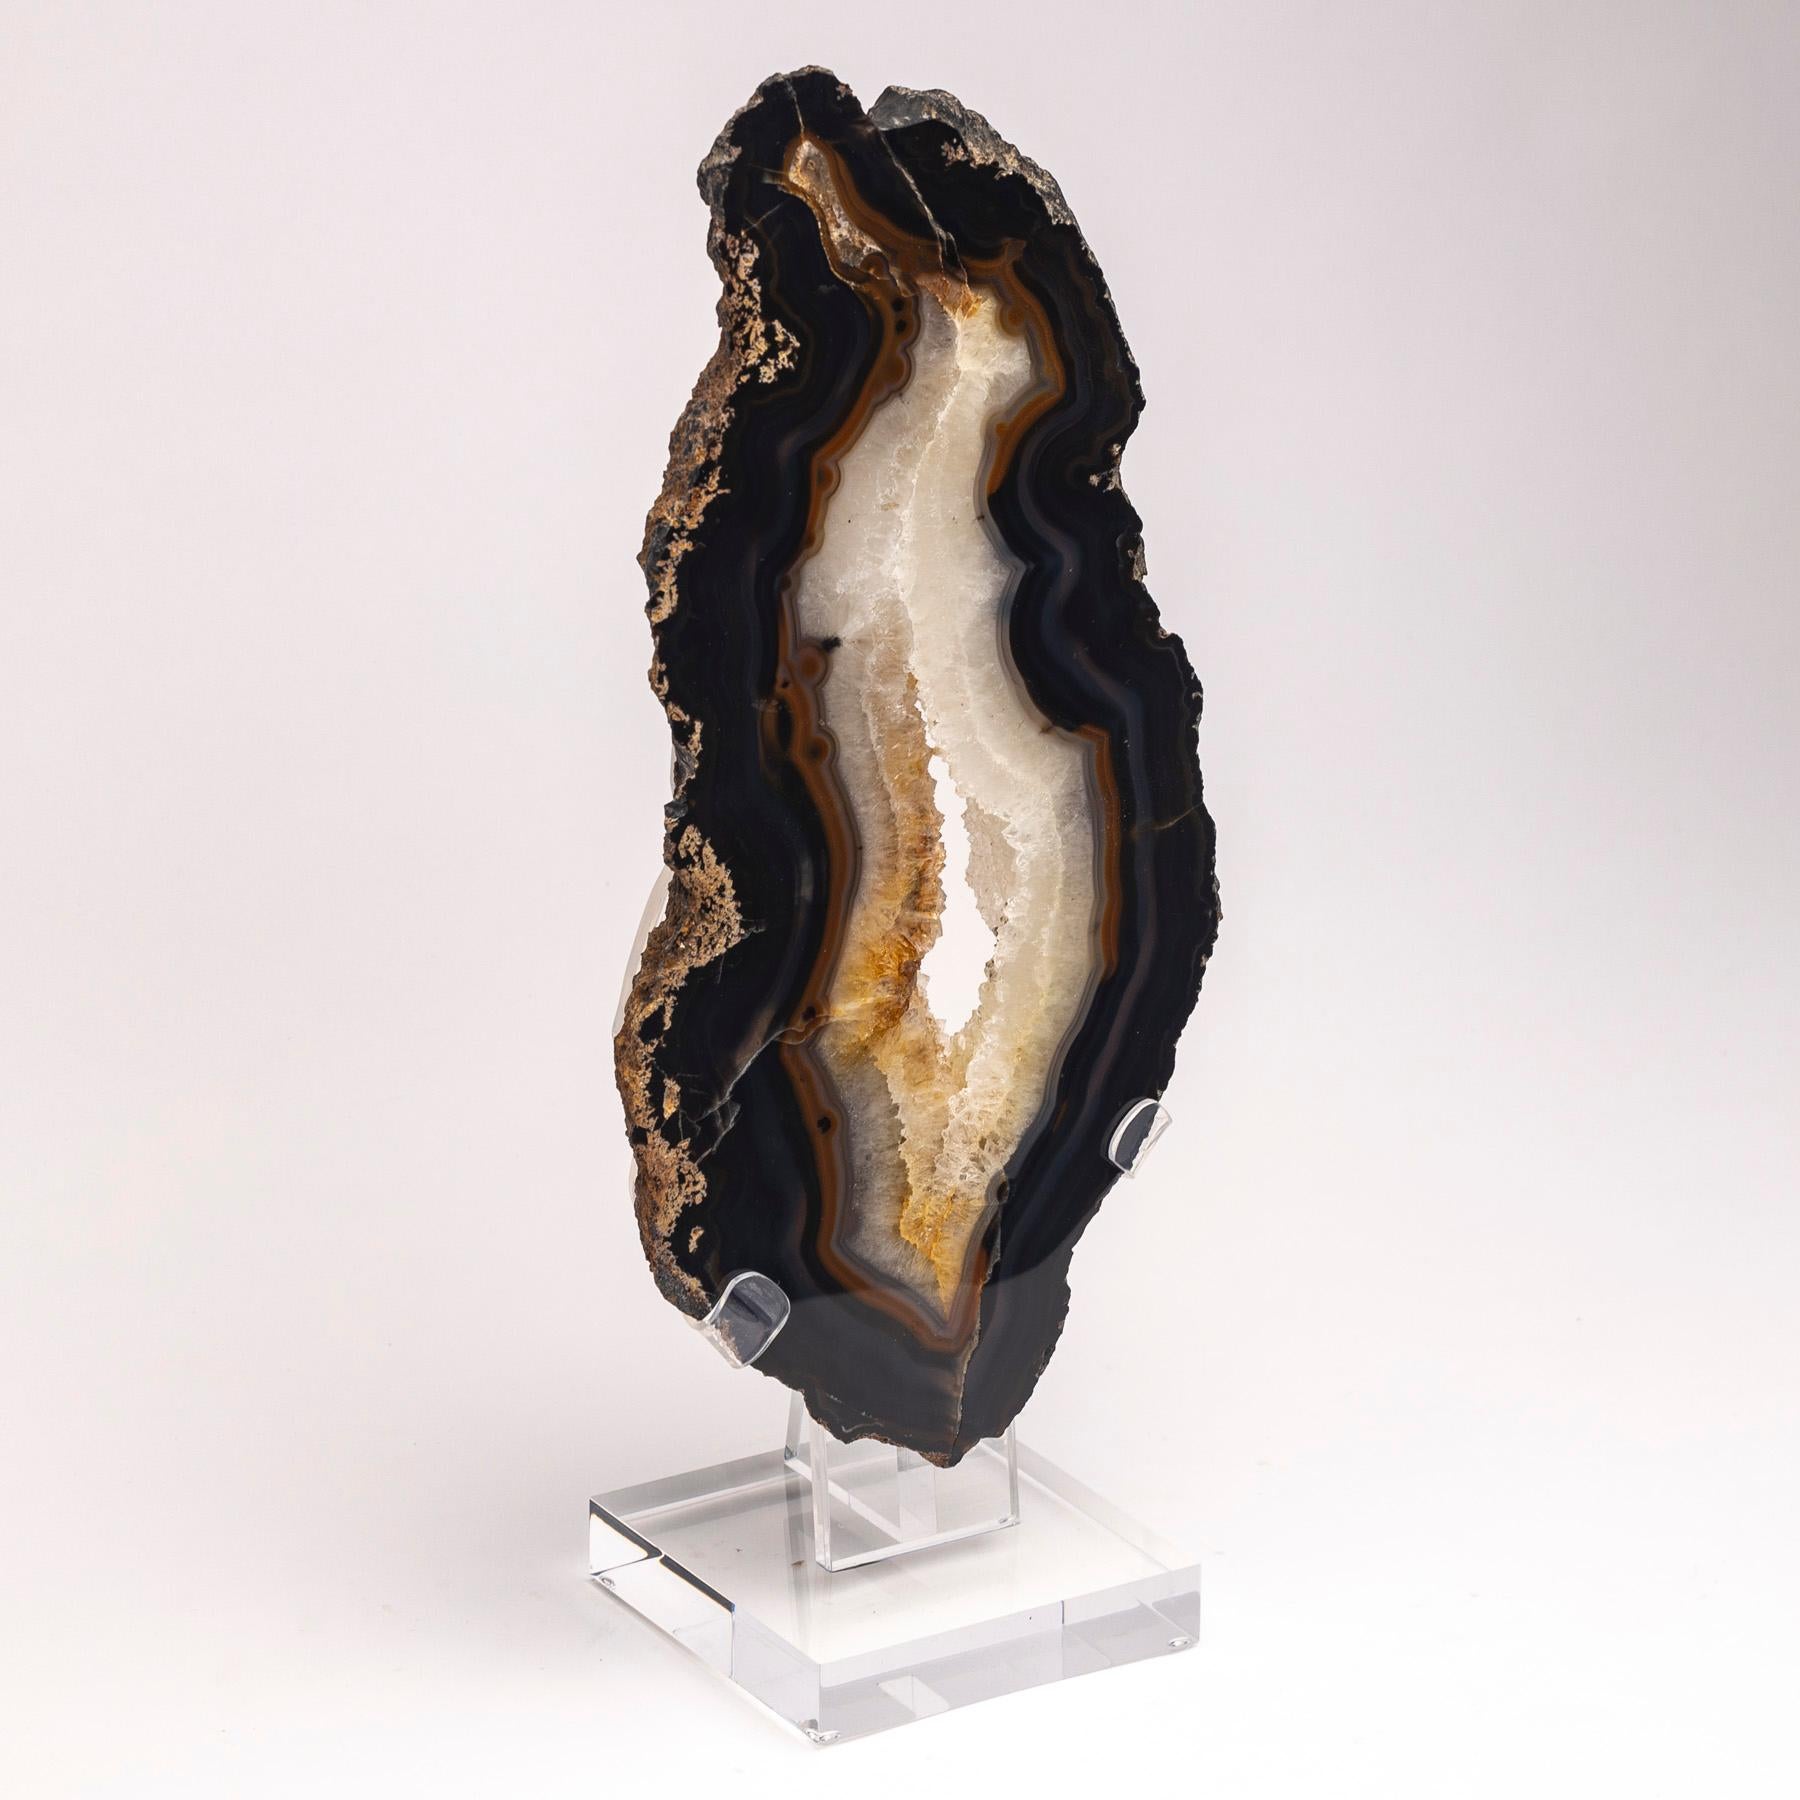 Polished Brazilian Banded Agate Slab with Crystallizations on a Custom Acrylic Stand